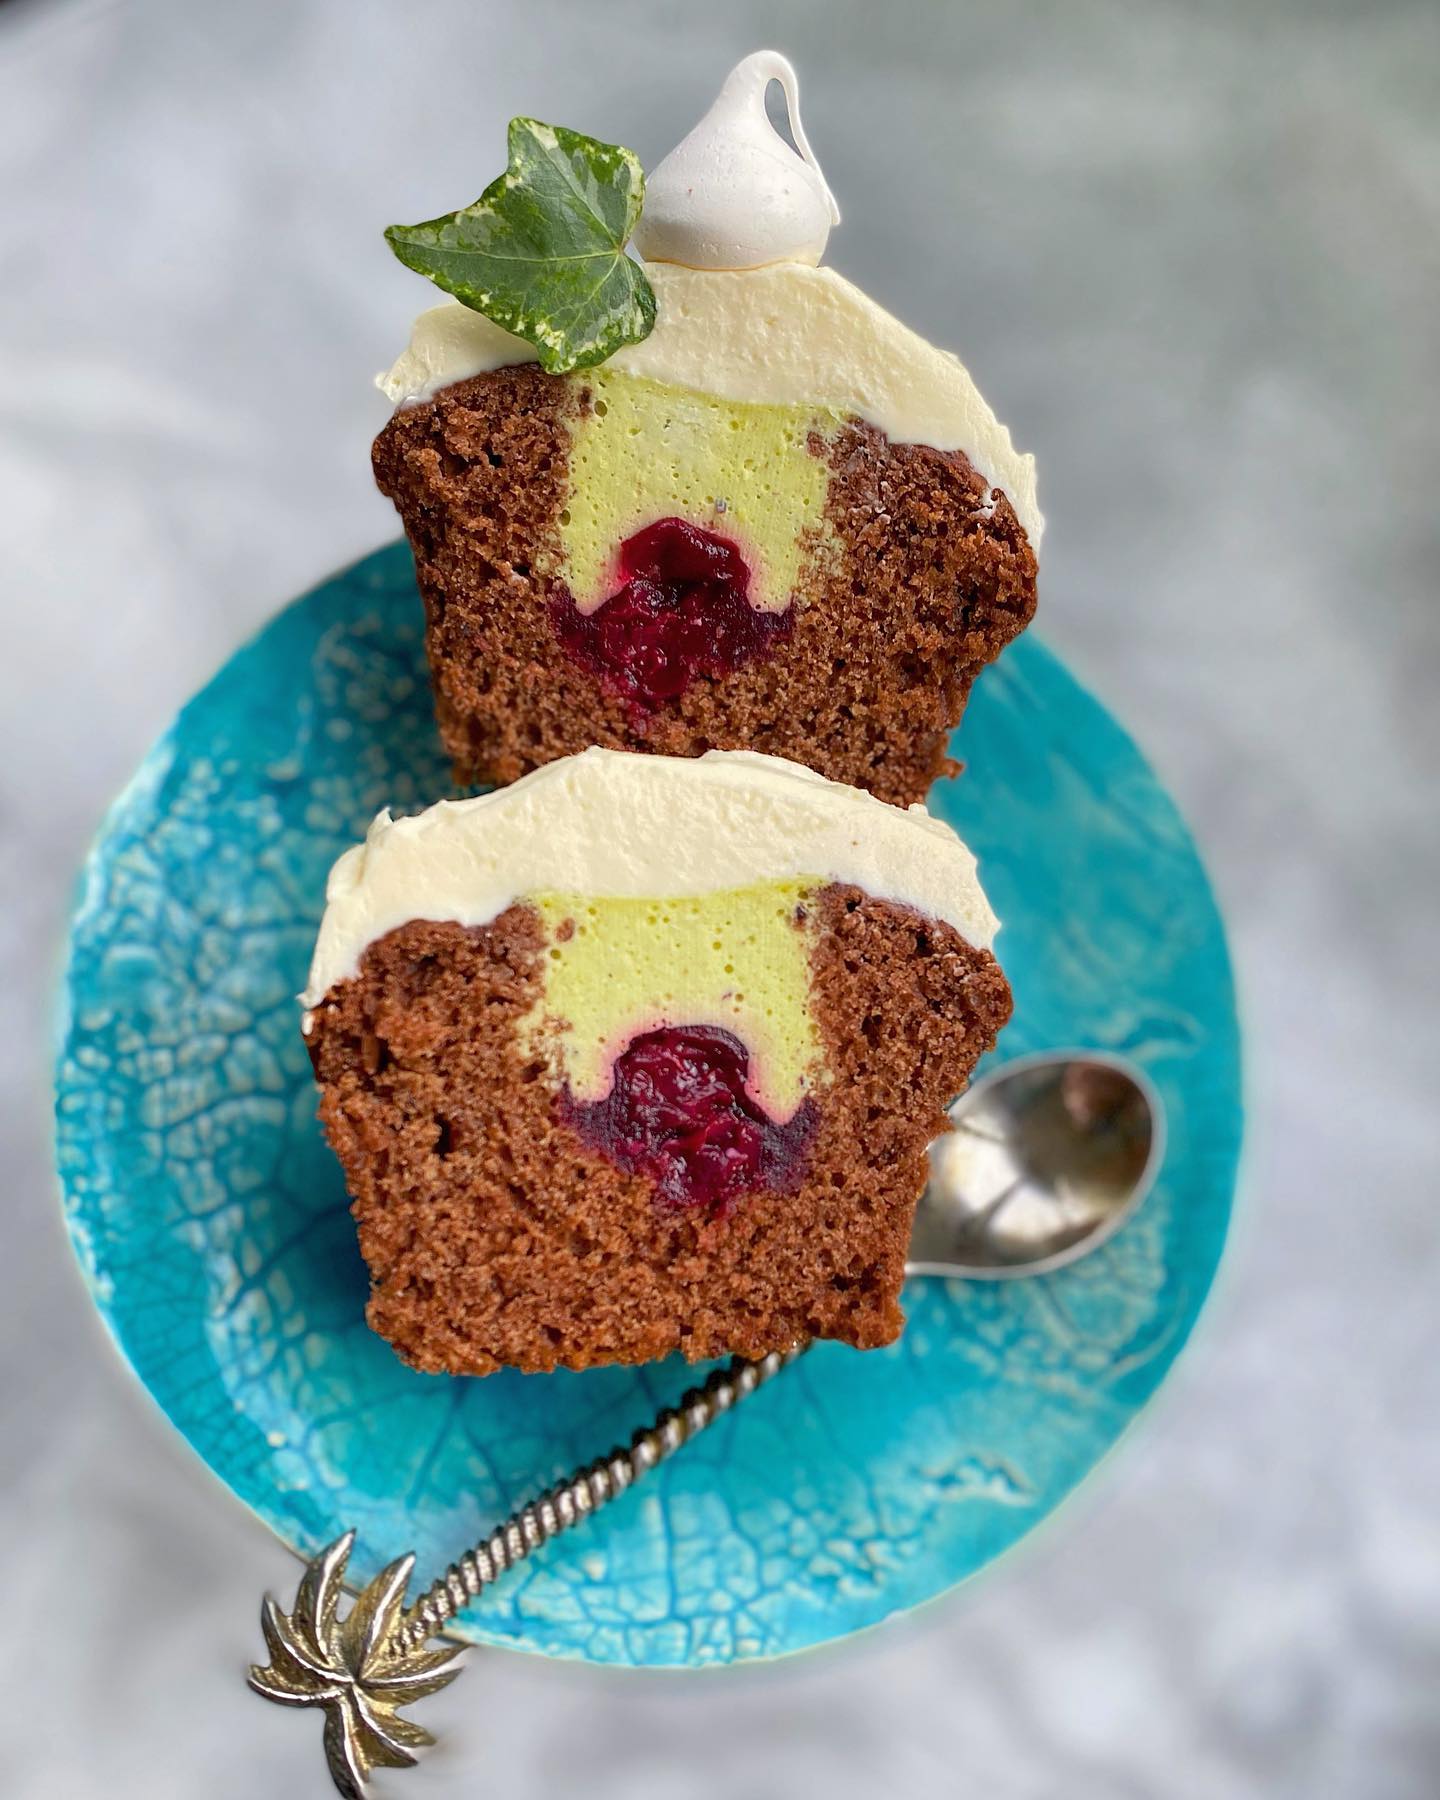 Chocolate muffins with pistachio mousse and berries